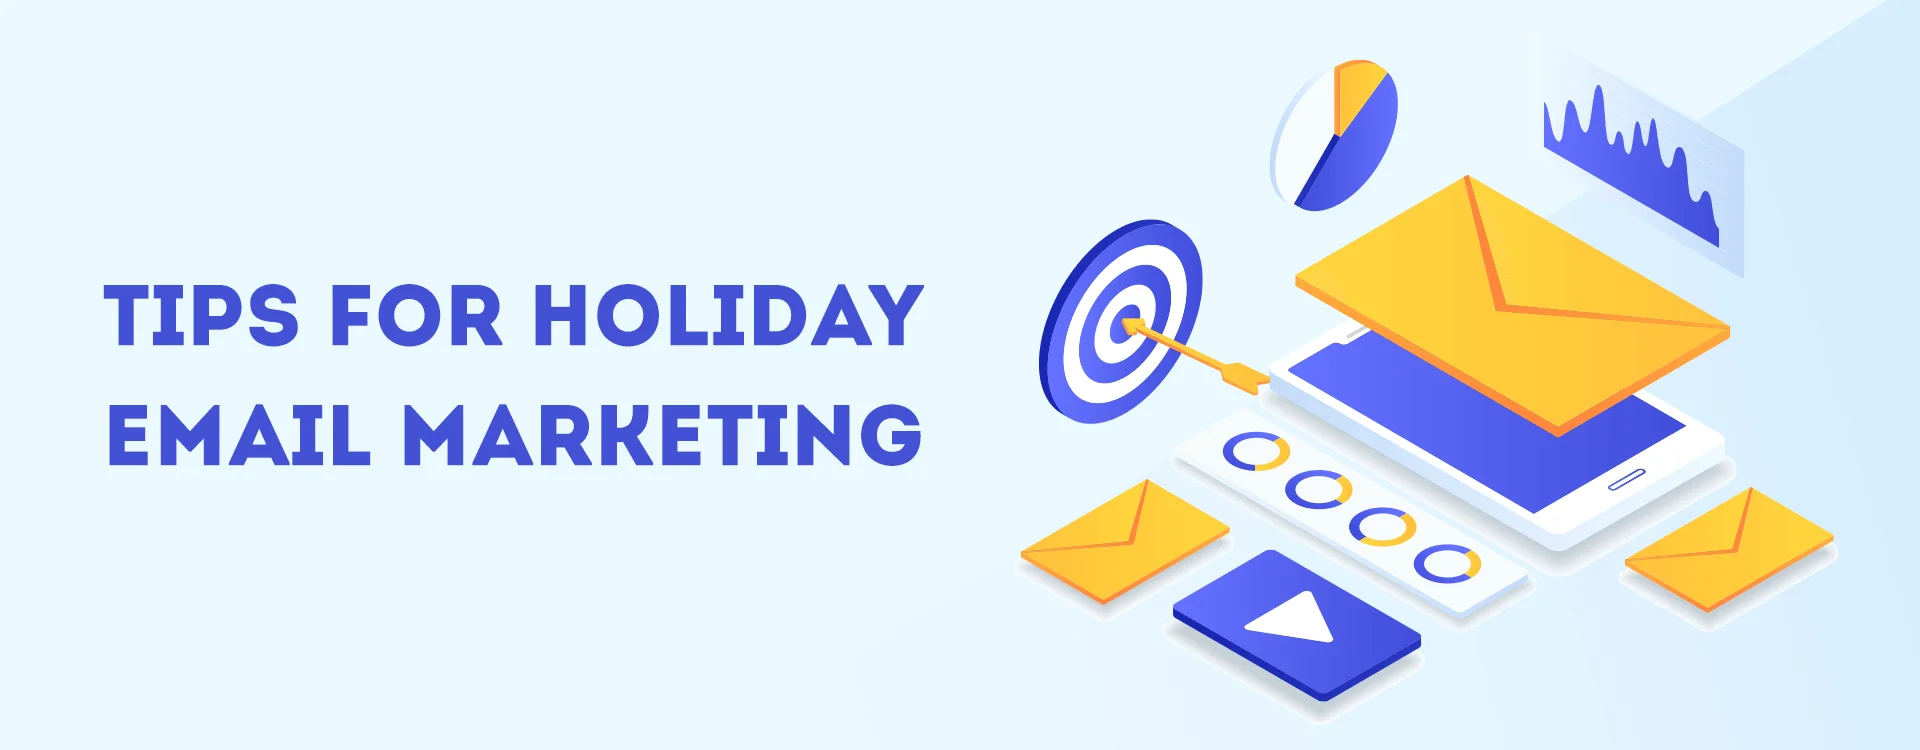 Tips for holiday email marketing